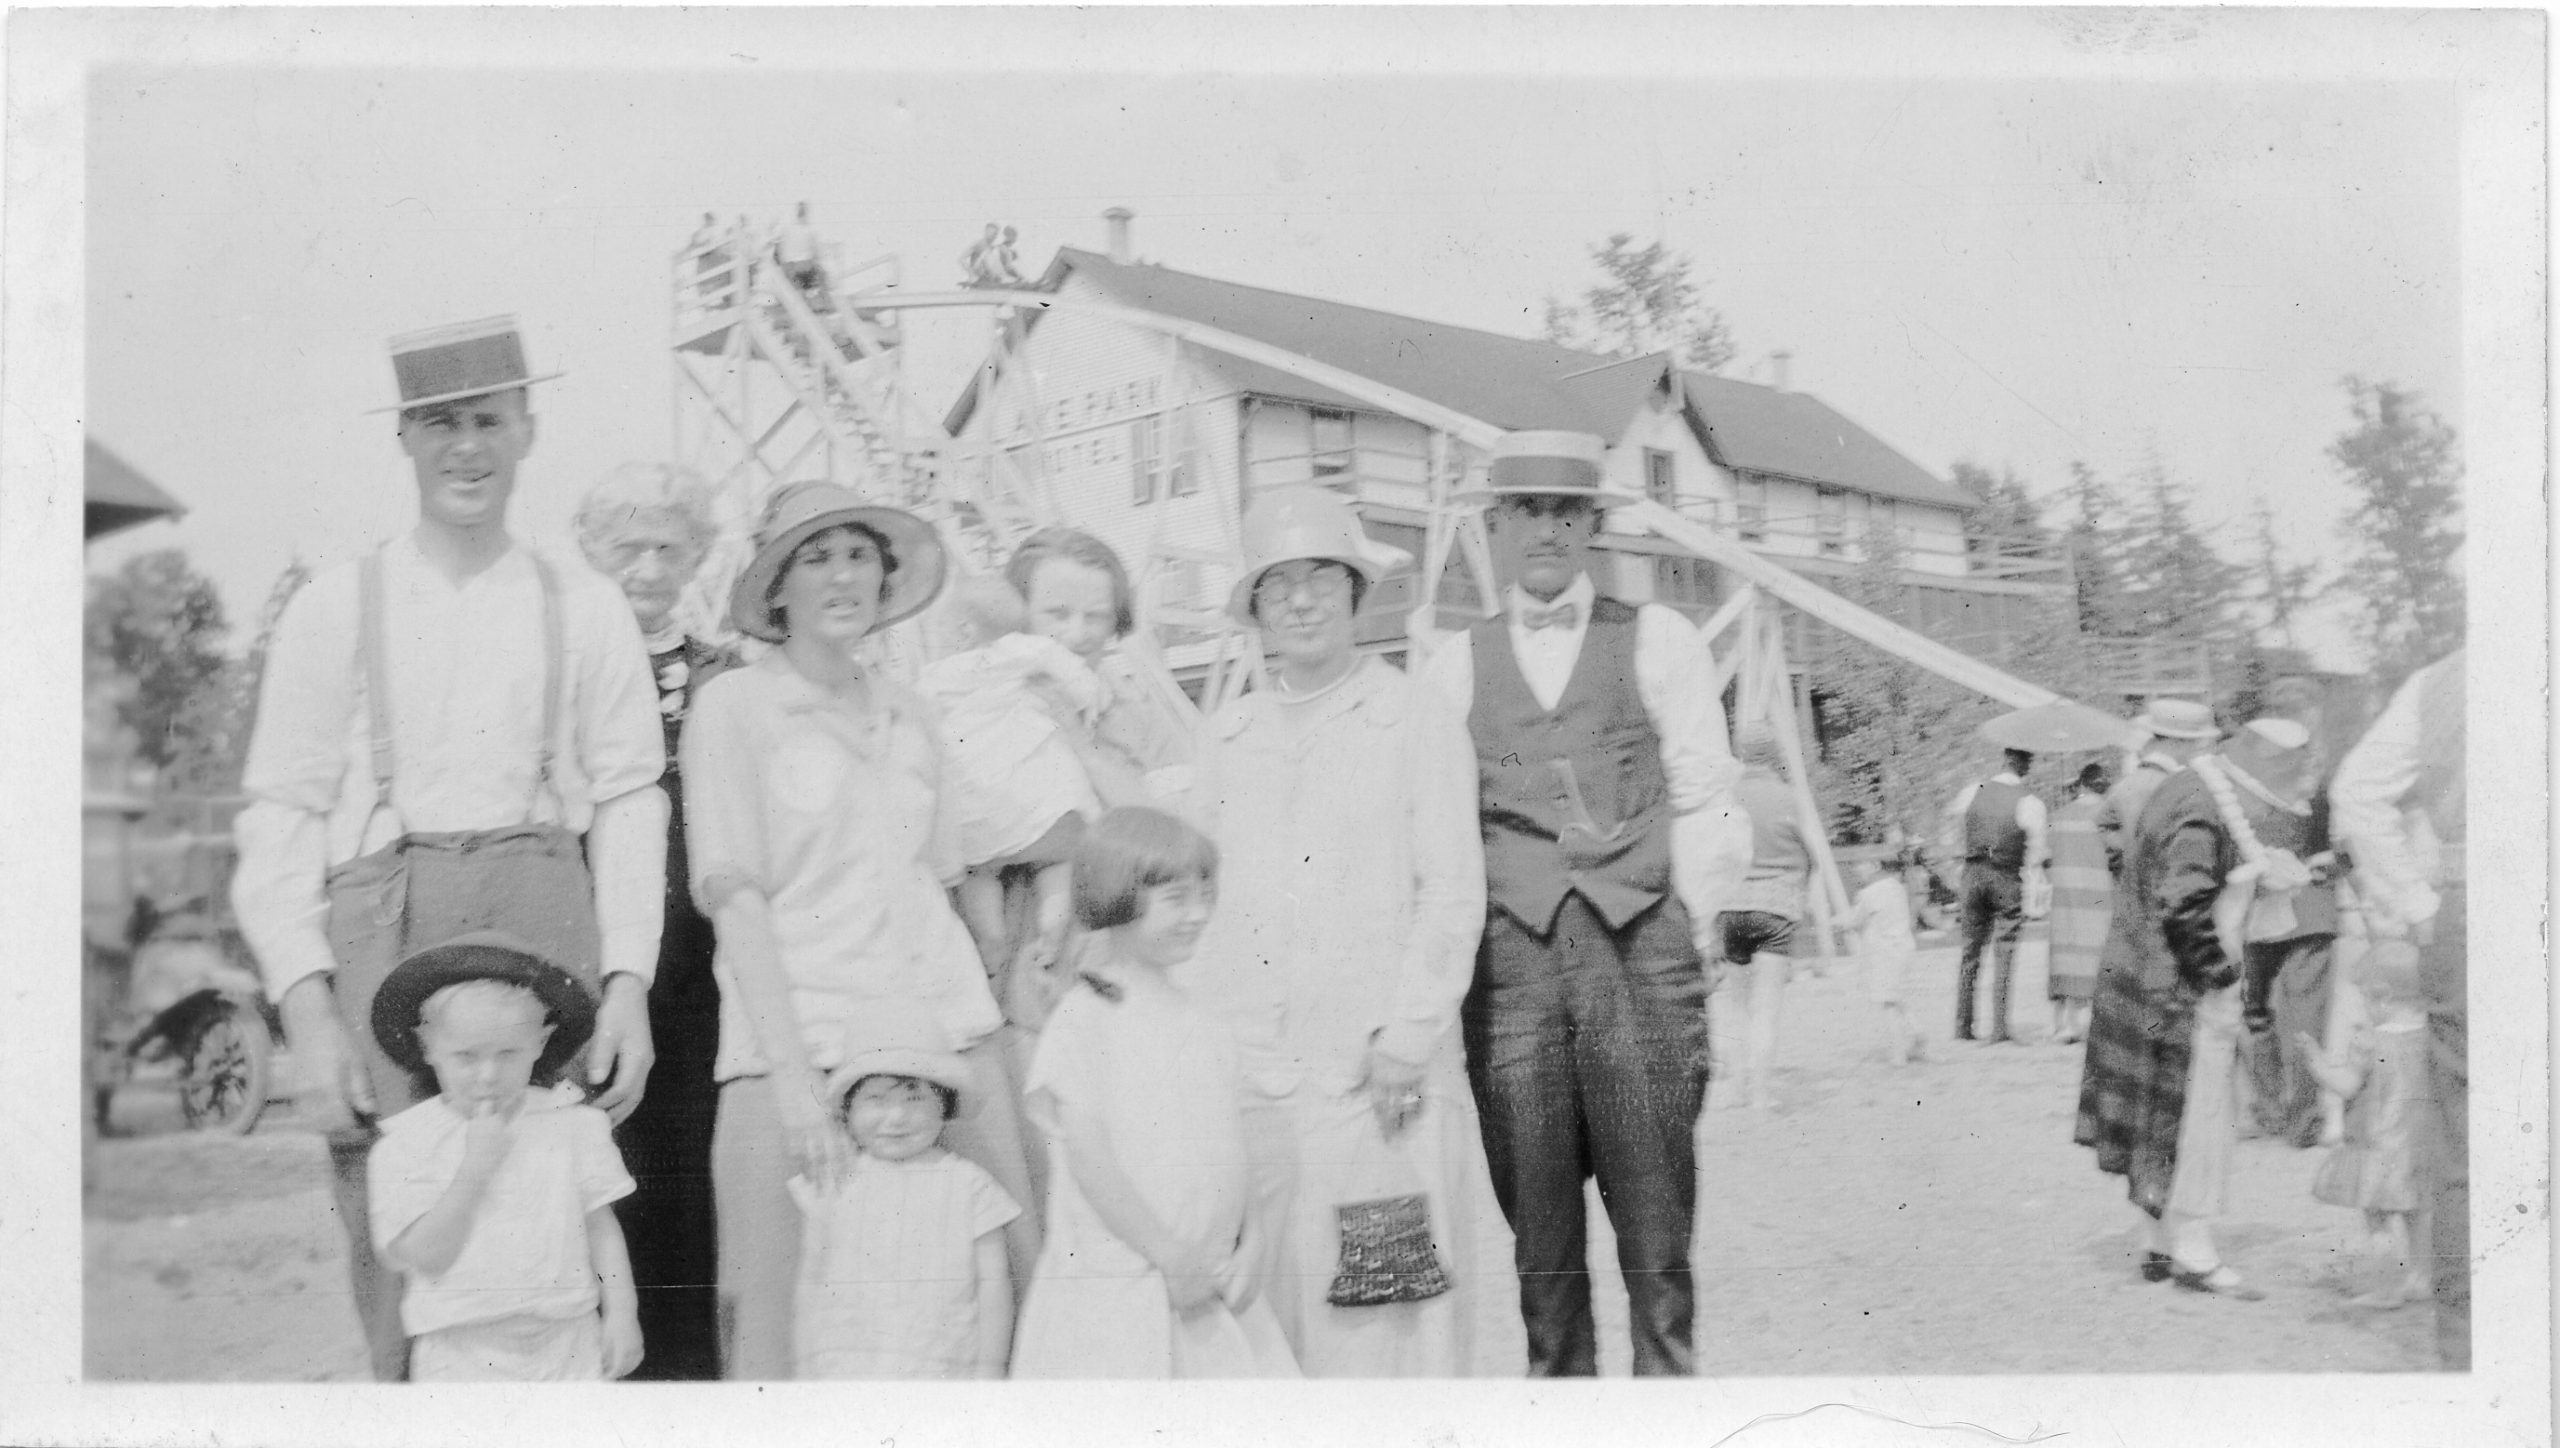 A group of unidentified adults and children standing in front of the Lake Park Hotel.